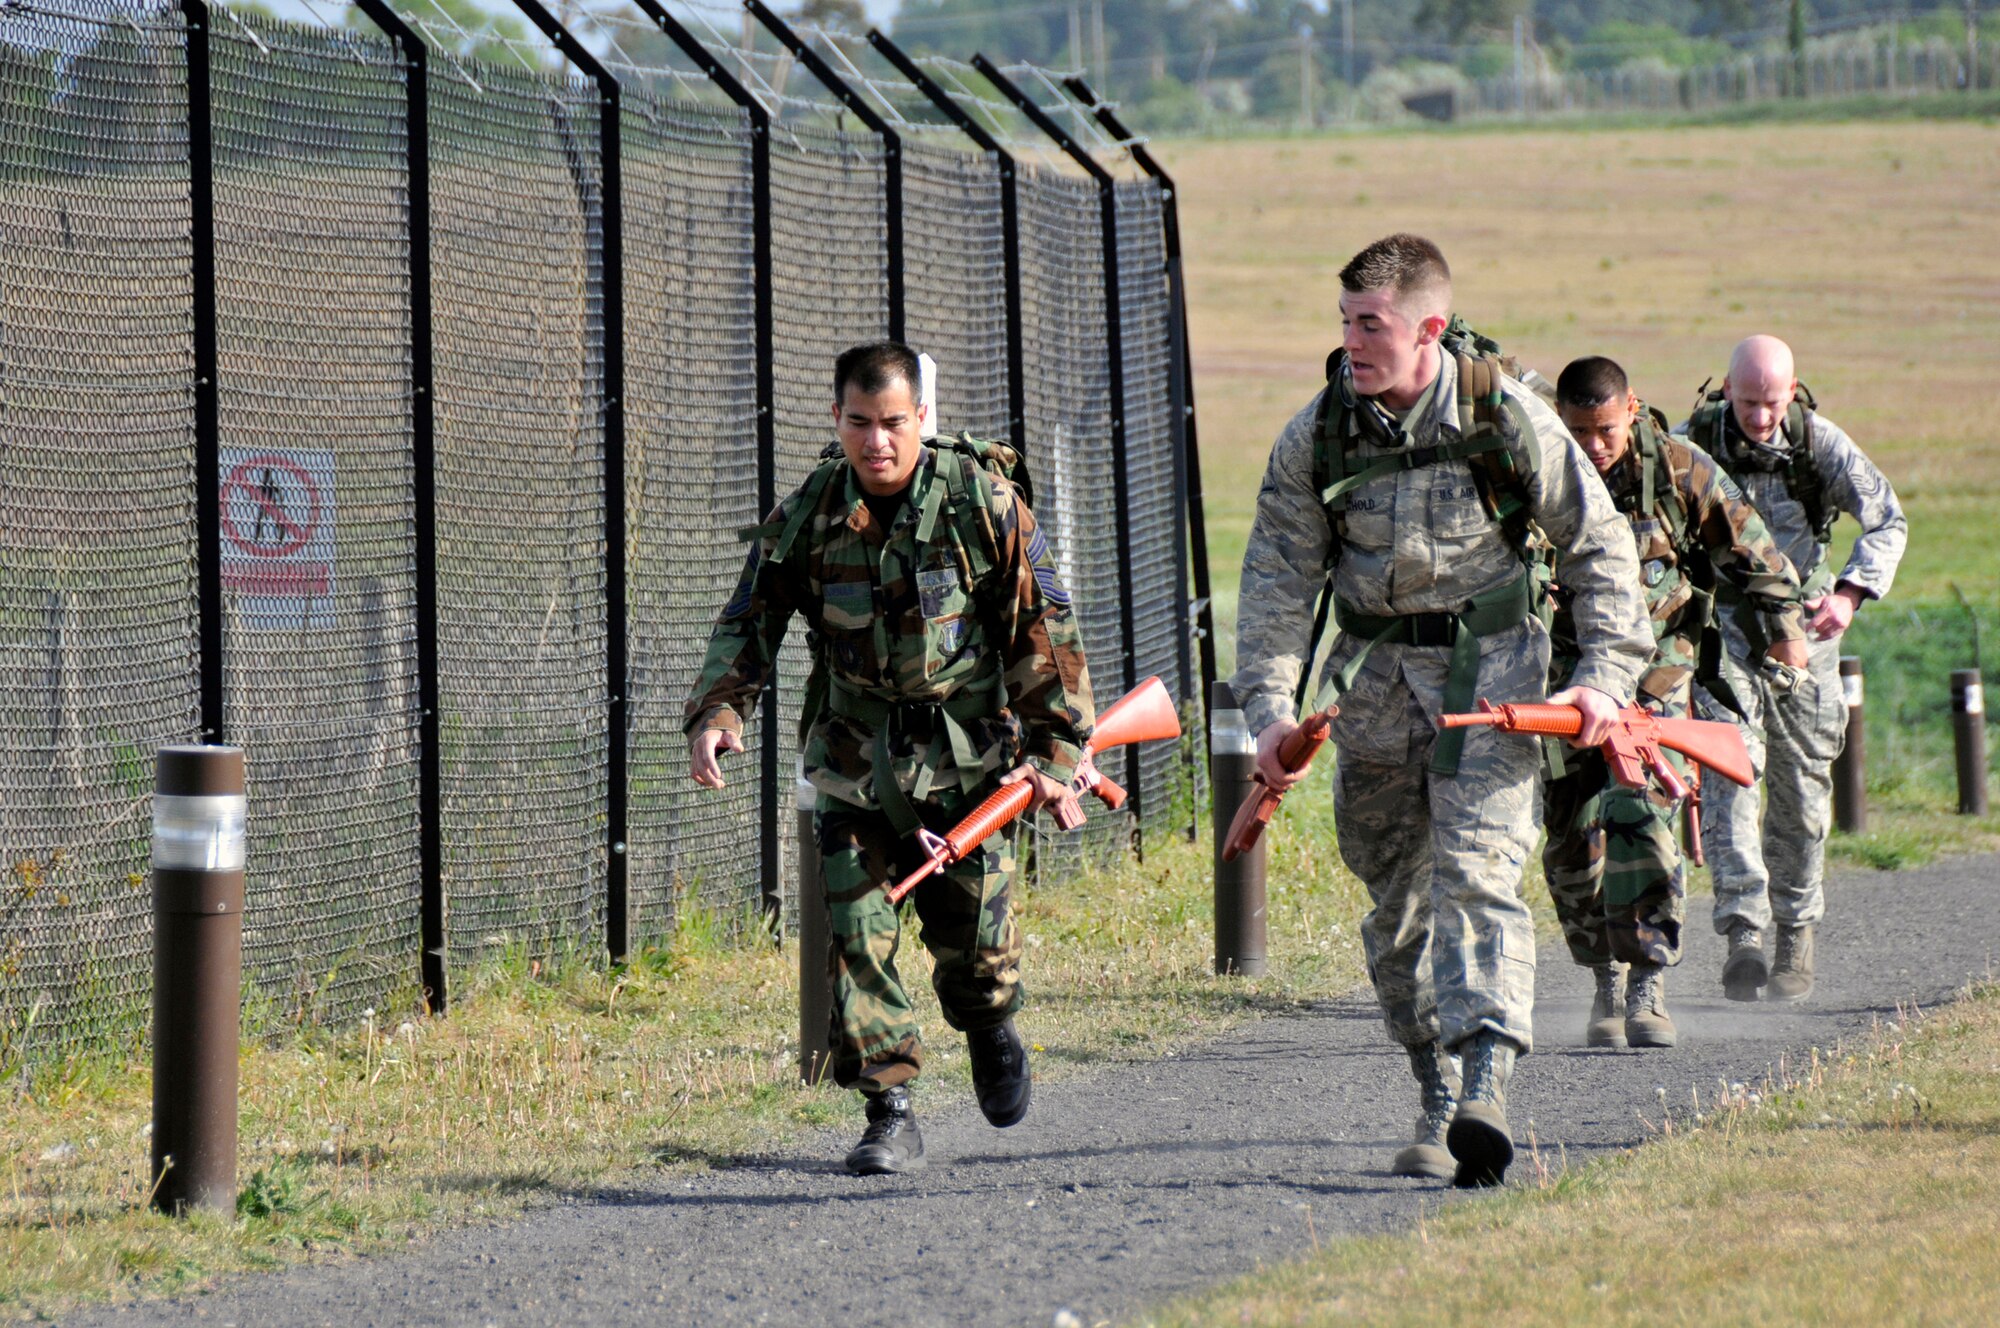 ROYAL AIR FORCE LAKENHEATH, England -- Airmen run to the next obstacle during the 2009 National Police Week 5k Ruck March May 11, 2009. The 5K Ruck March is one of many events for the 2009 National Police Week.  (U.S. Air Force photo by Airman 1st Class Perry Aston) 